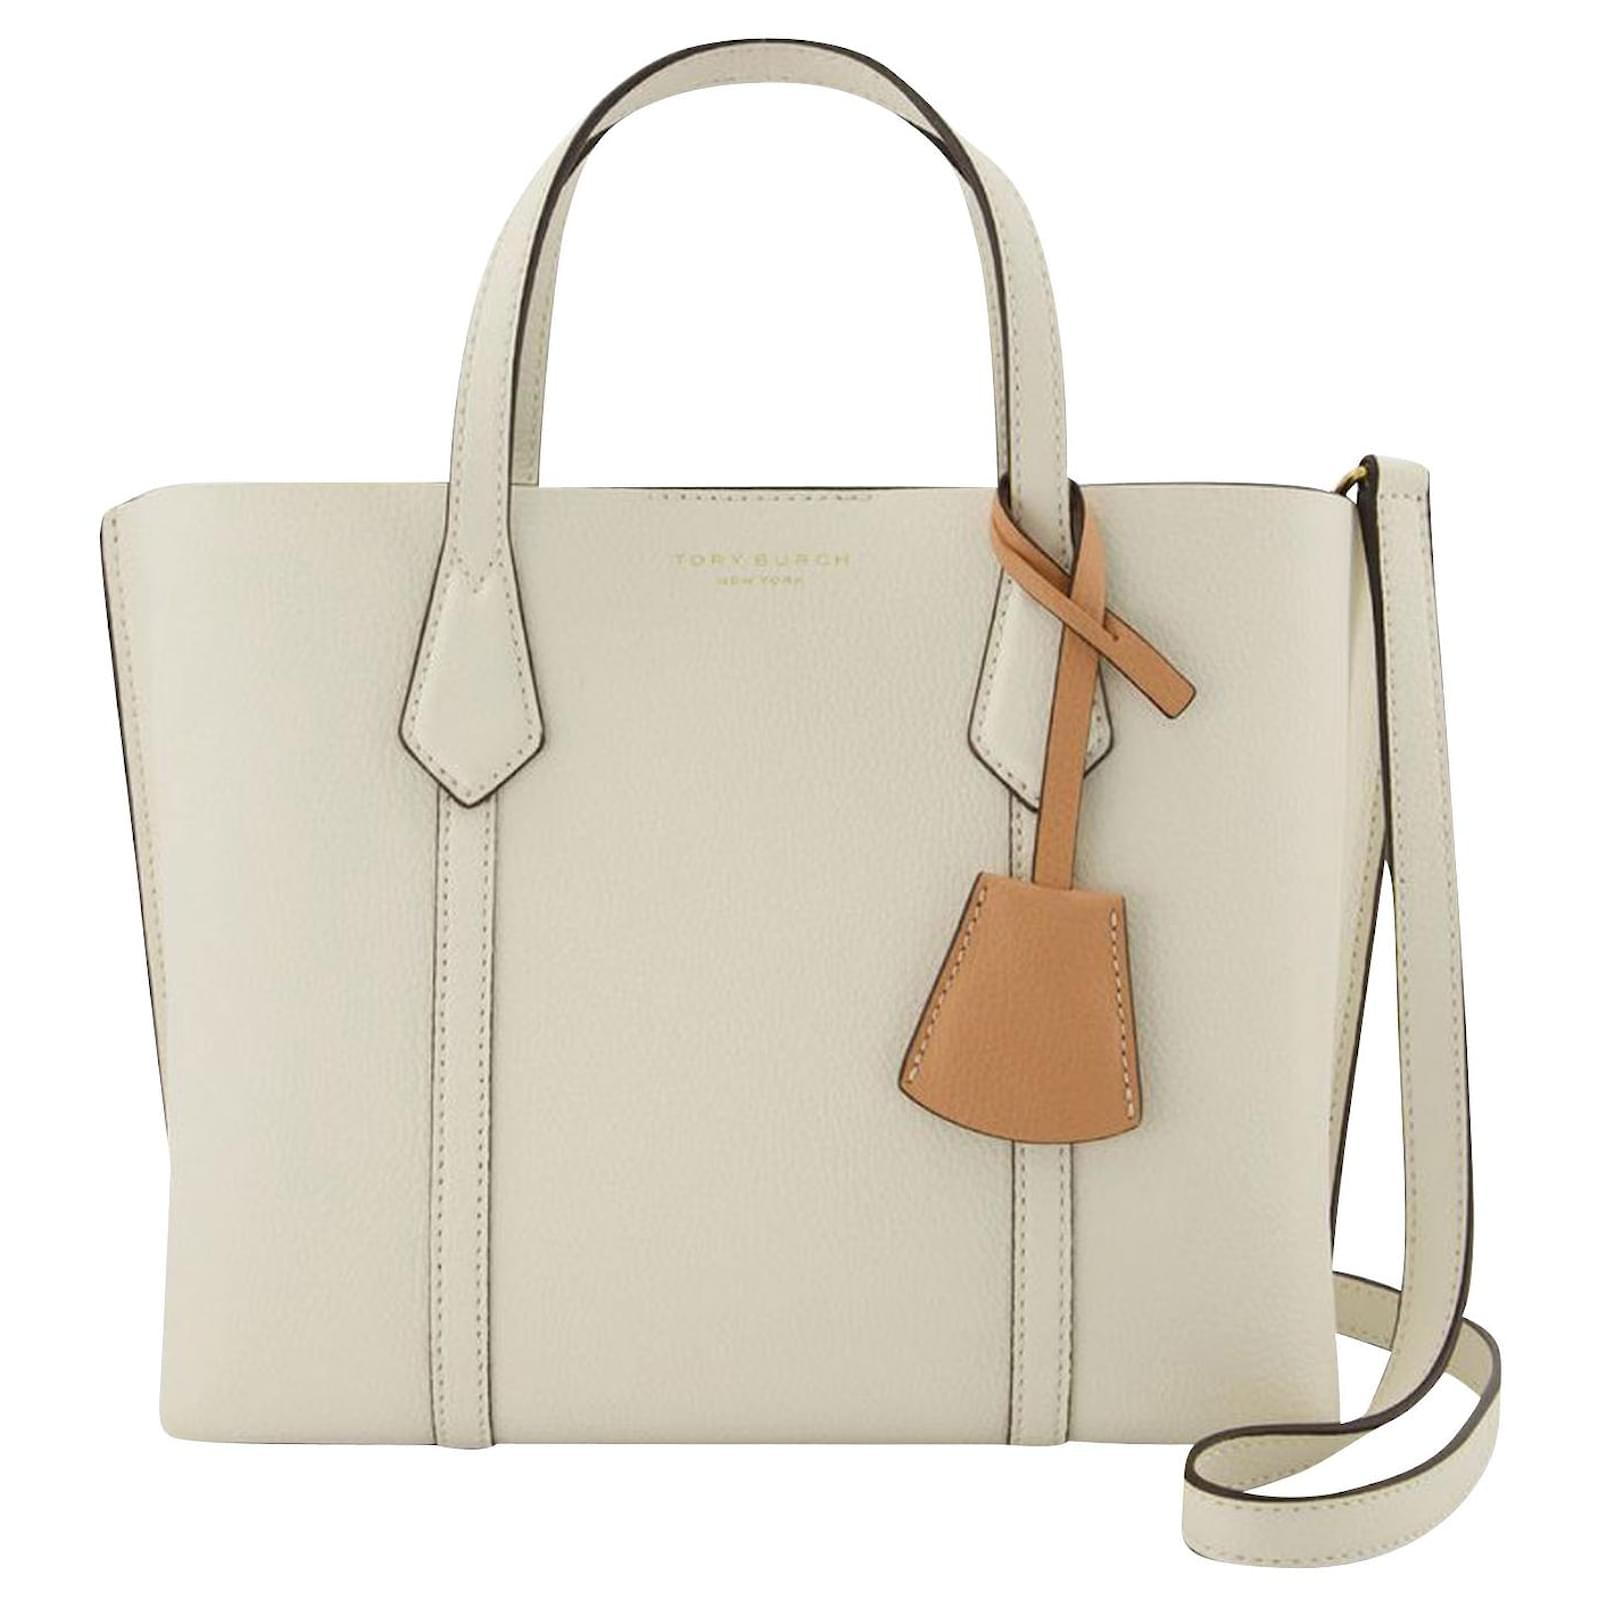 Perry Small Tote Bag - Tory Burch - New Ivory - Leather White ref